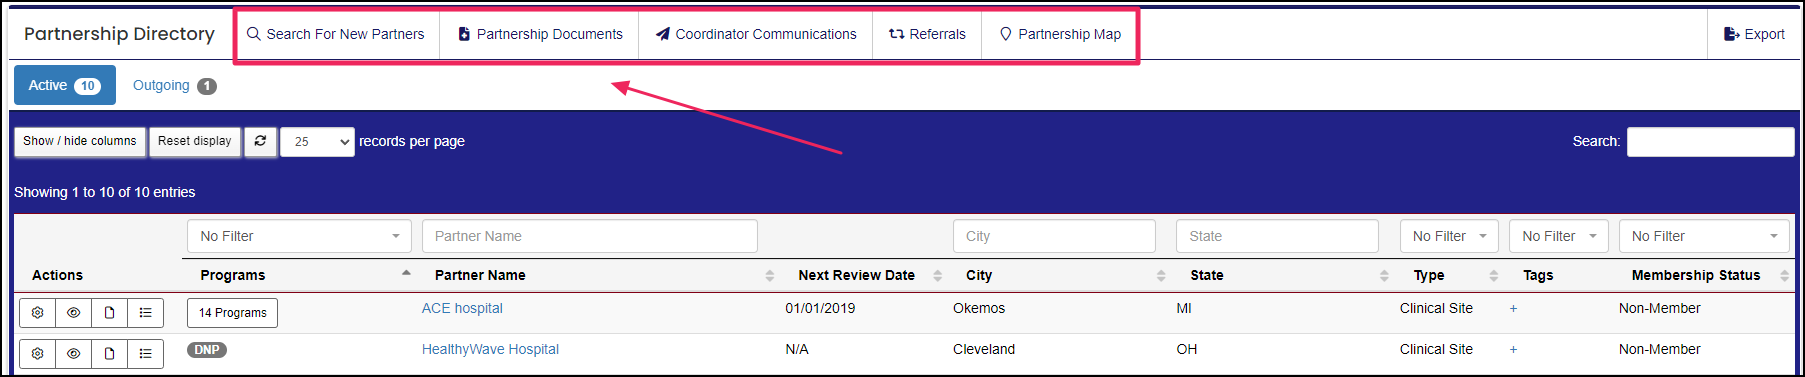 partnership directory nav-bar highlighting search, documents, communications, referrals, and map buttons